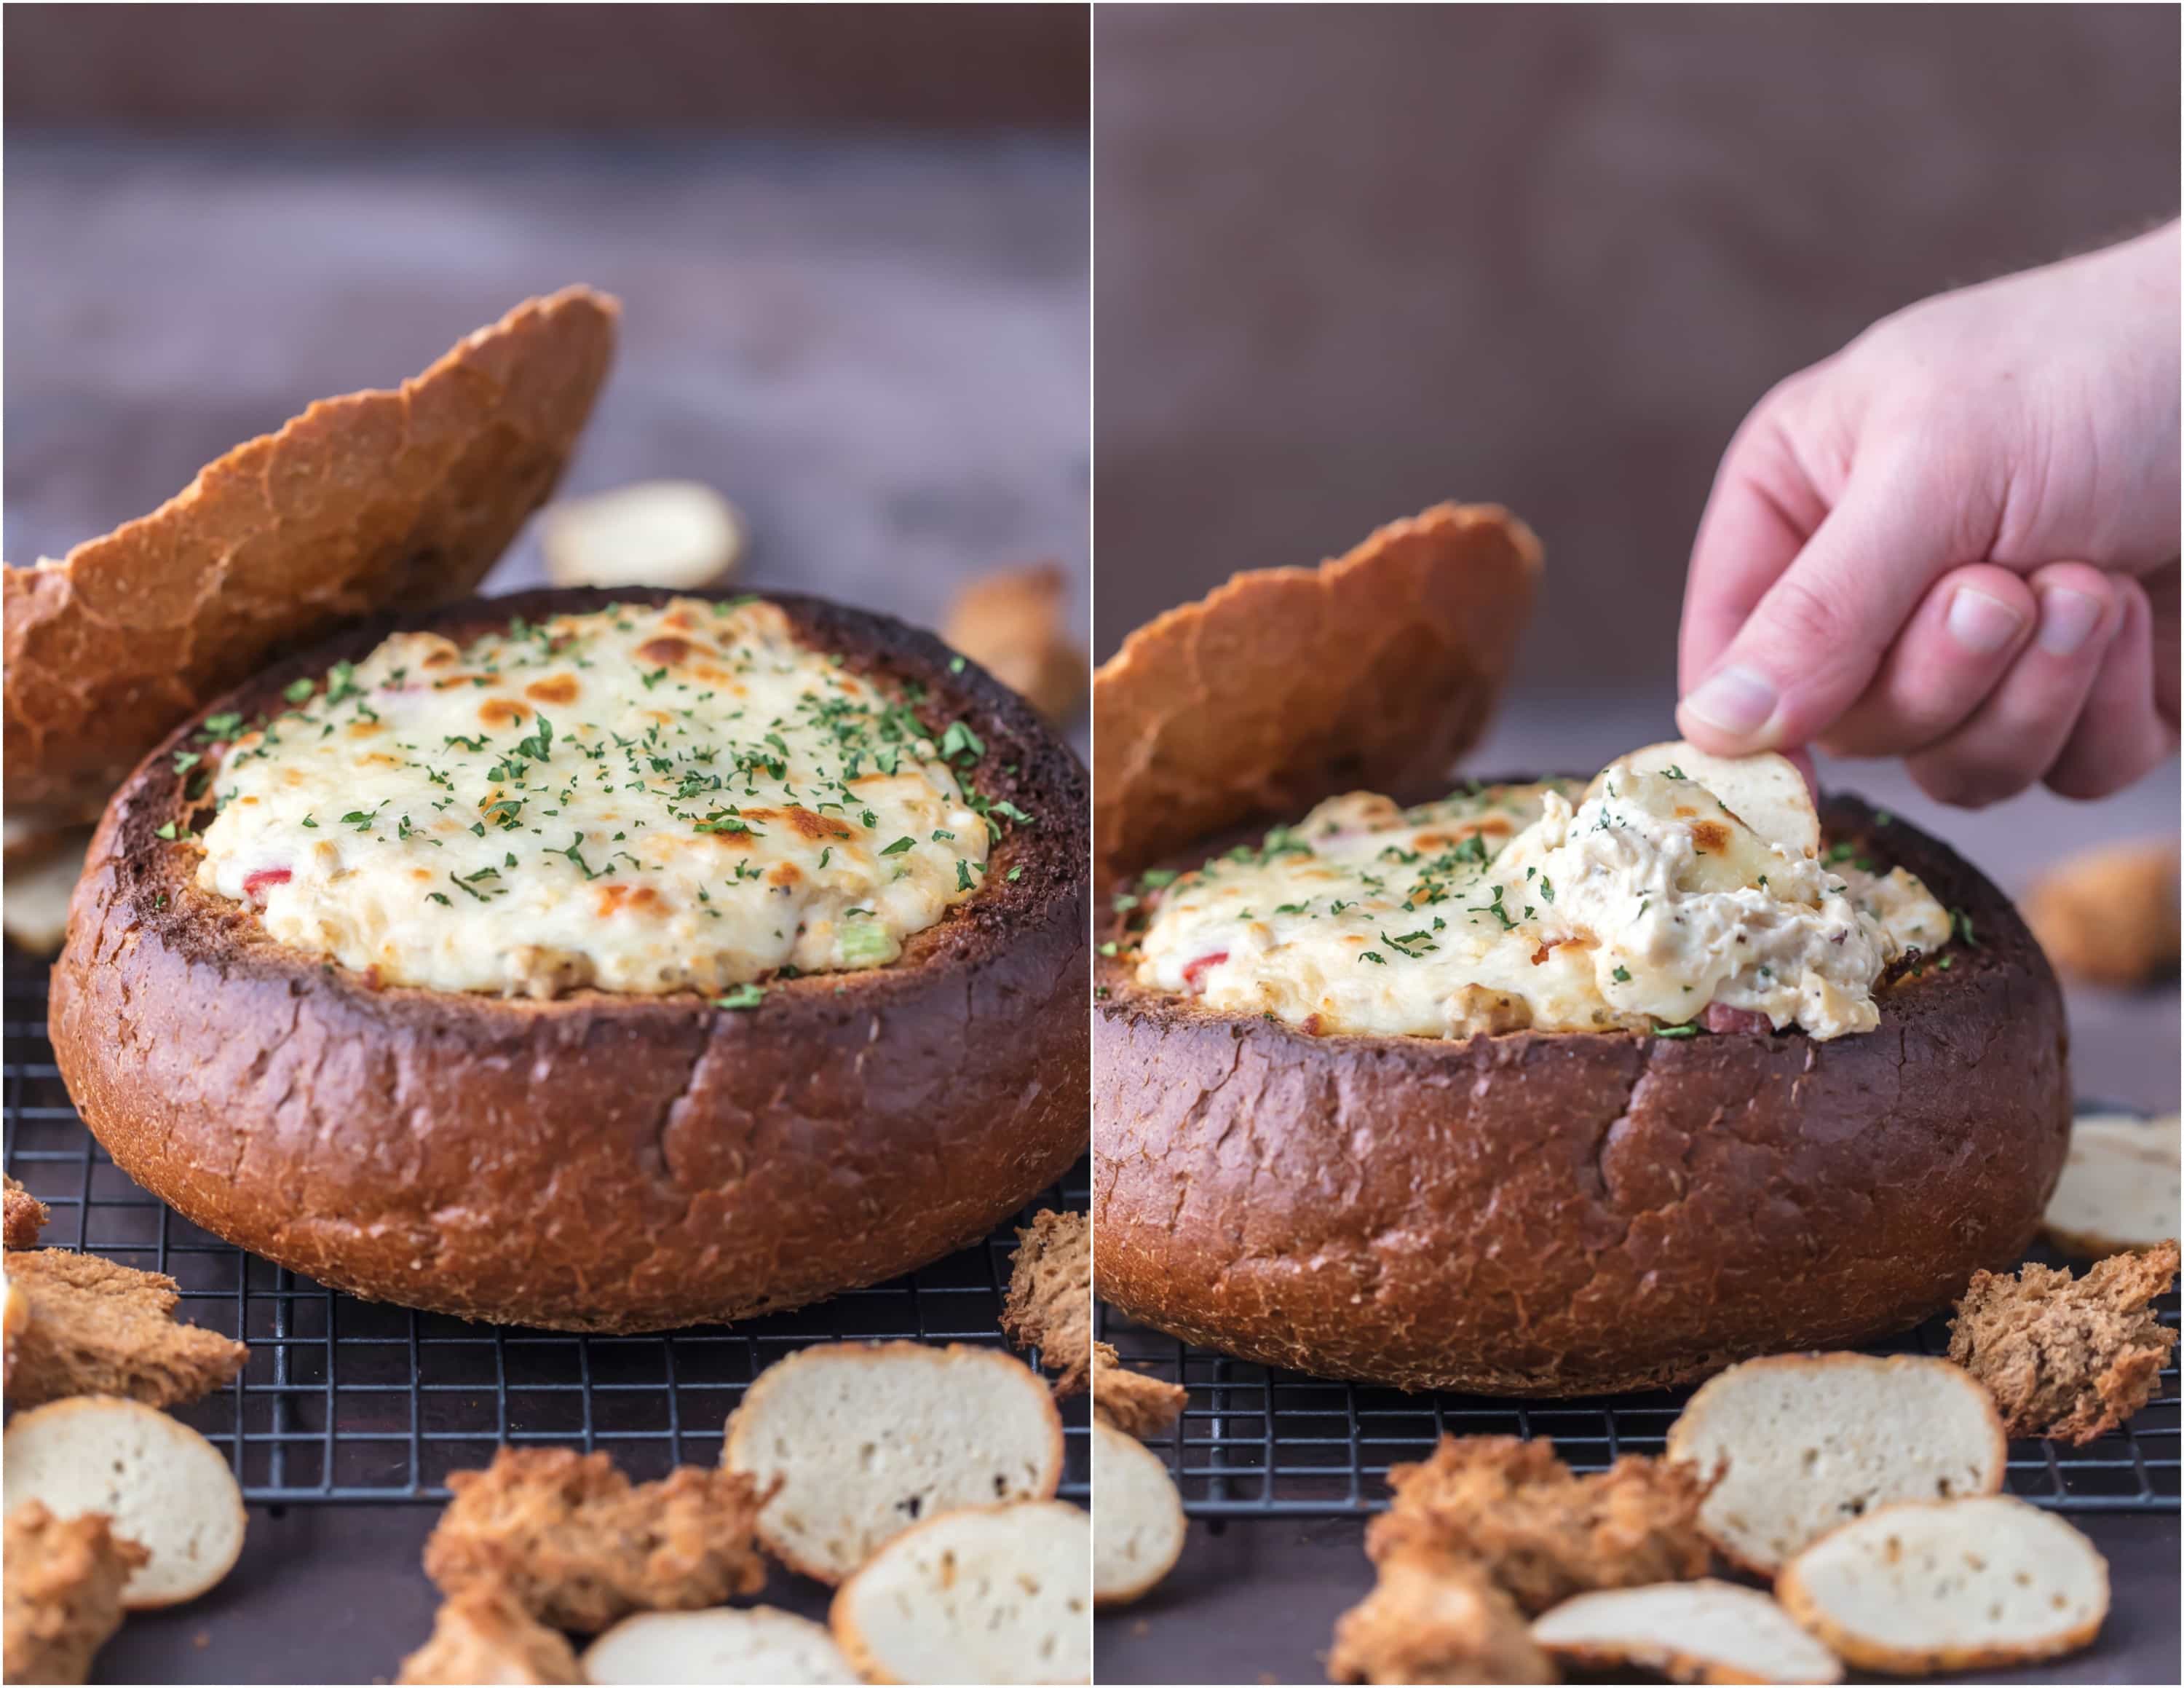 WARM CRAB ARTICHOKE DIP IN A BREAD BOWL is the perfect EASY appetizer for tailgating or celebrating with friends. The Super Bowl won't be the same without this simple, classy, and cheesy dip!